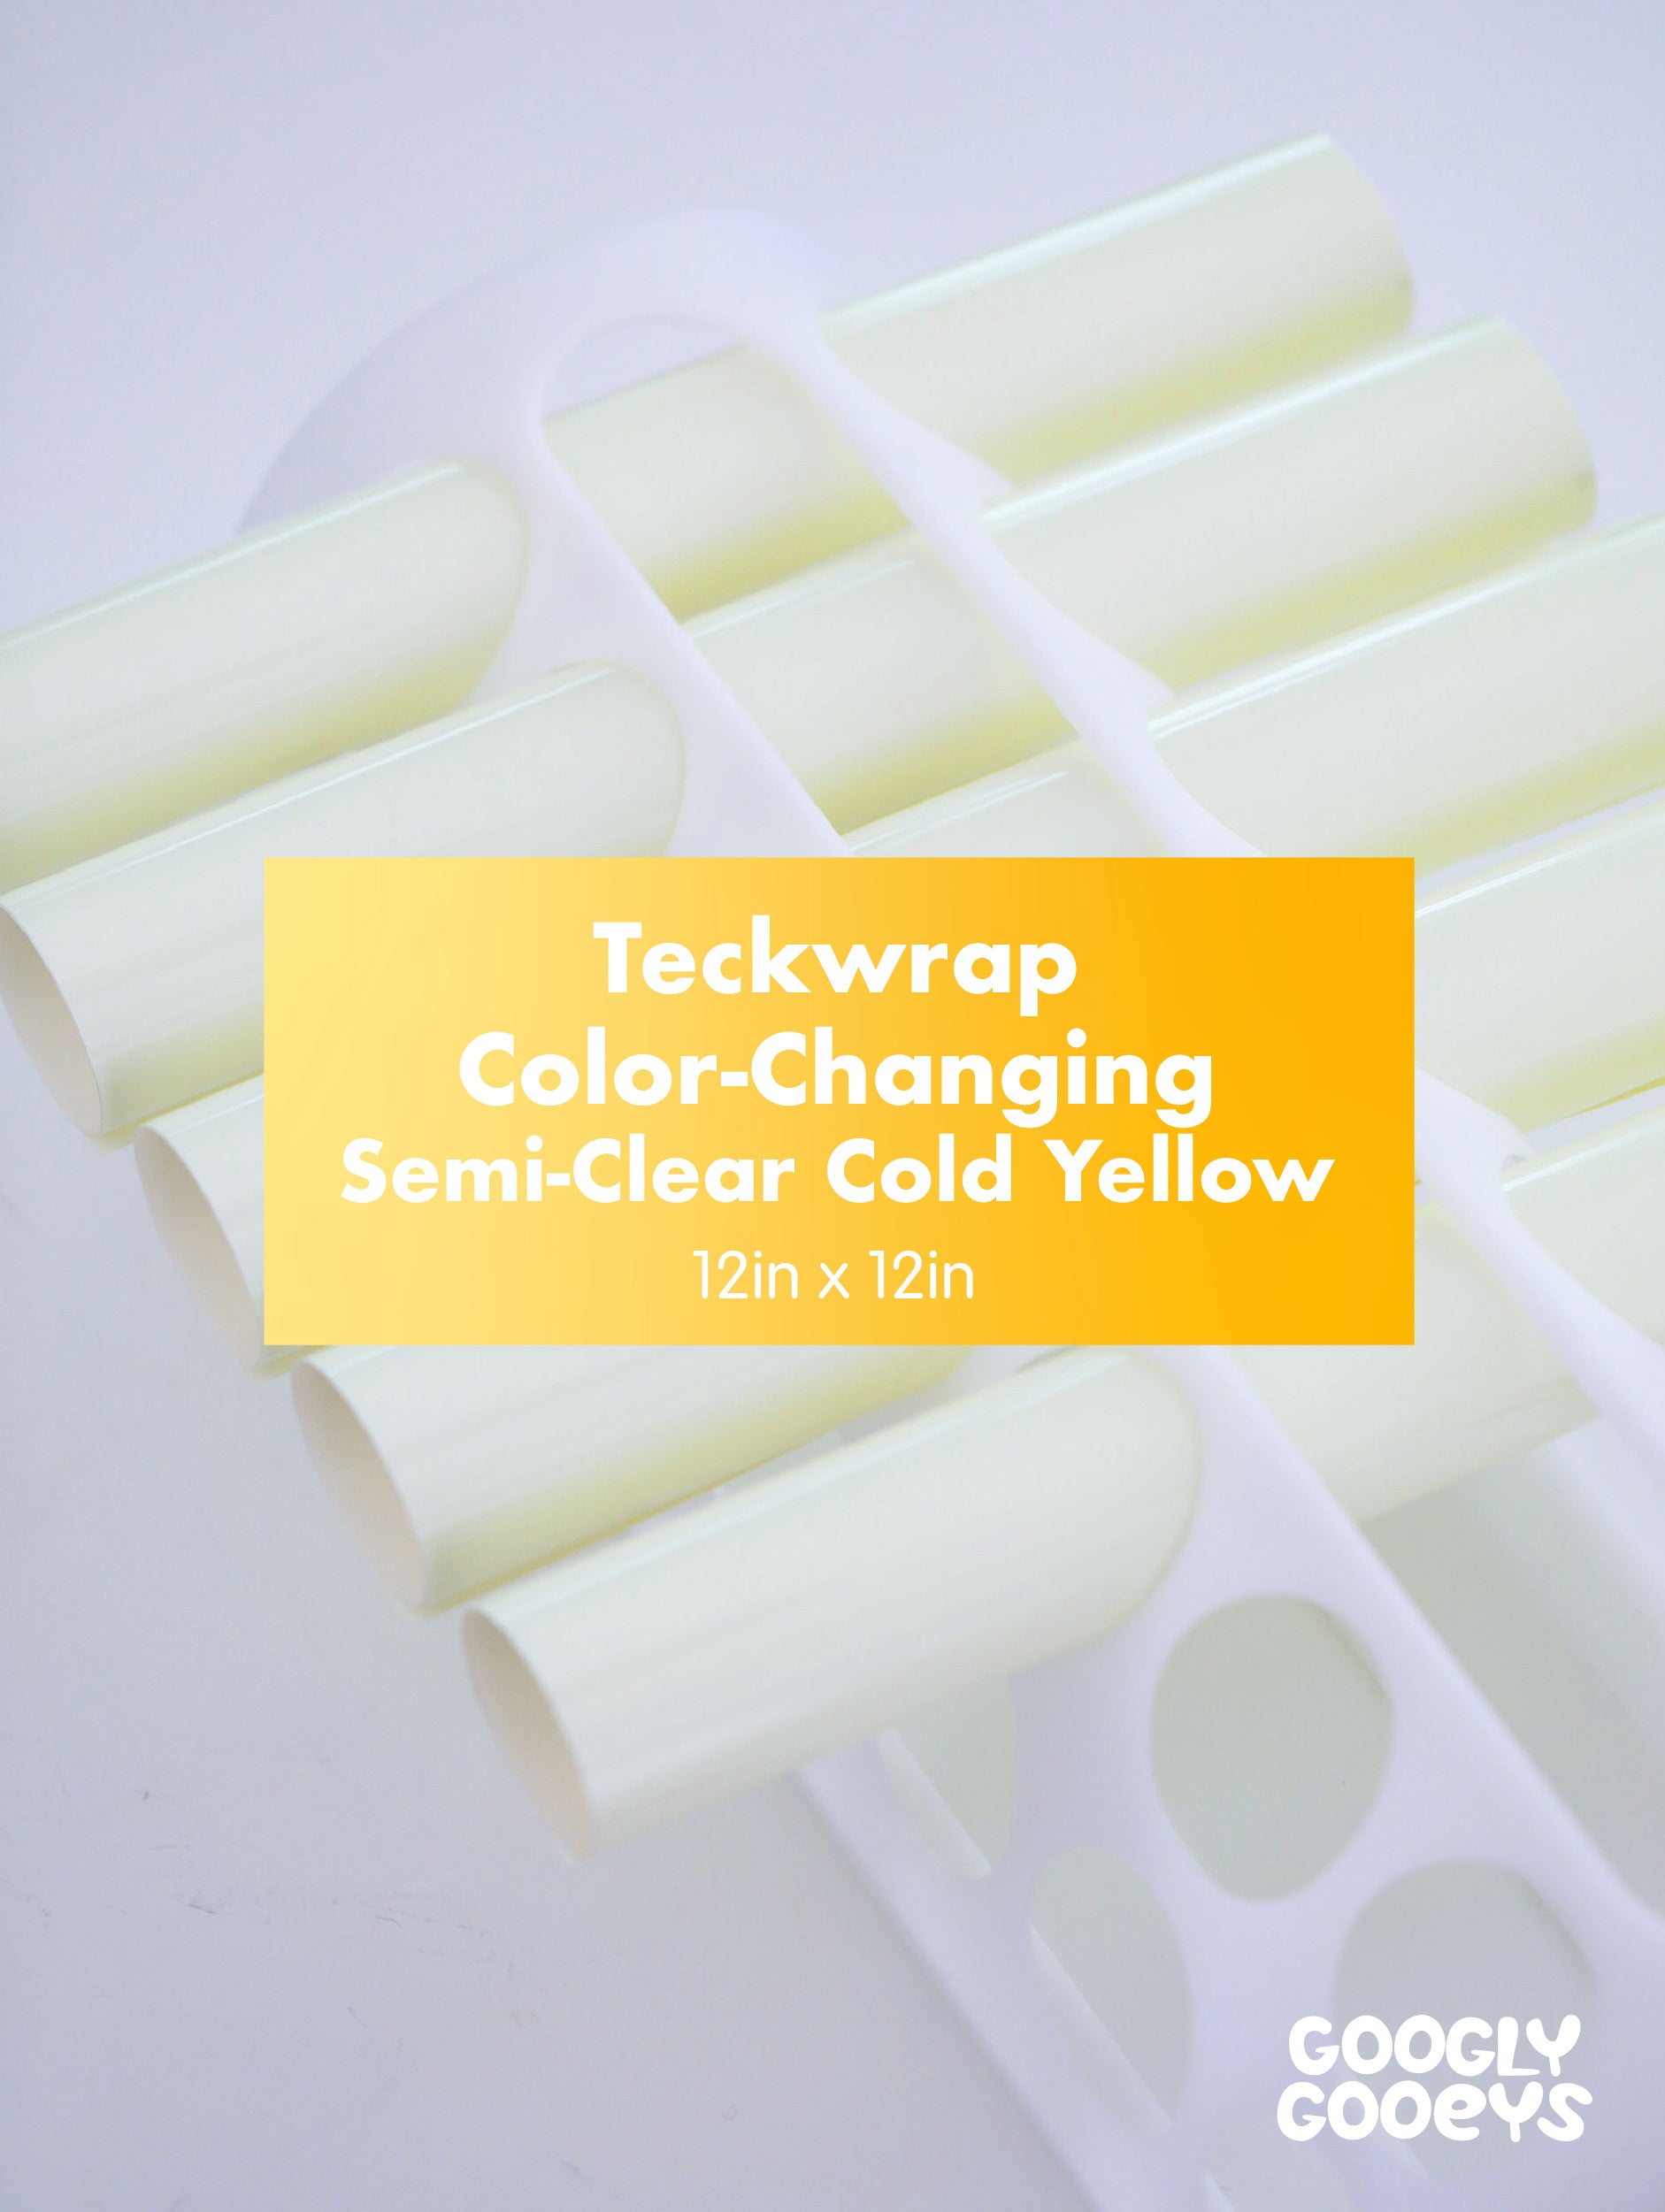 Teckwrap Color Changing Adhesive Vinyl Stickers | 12x12